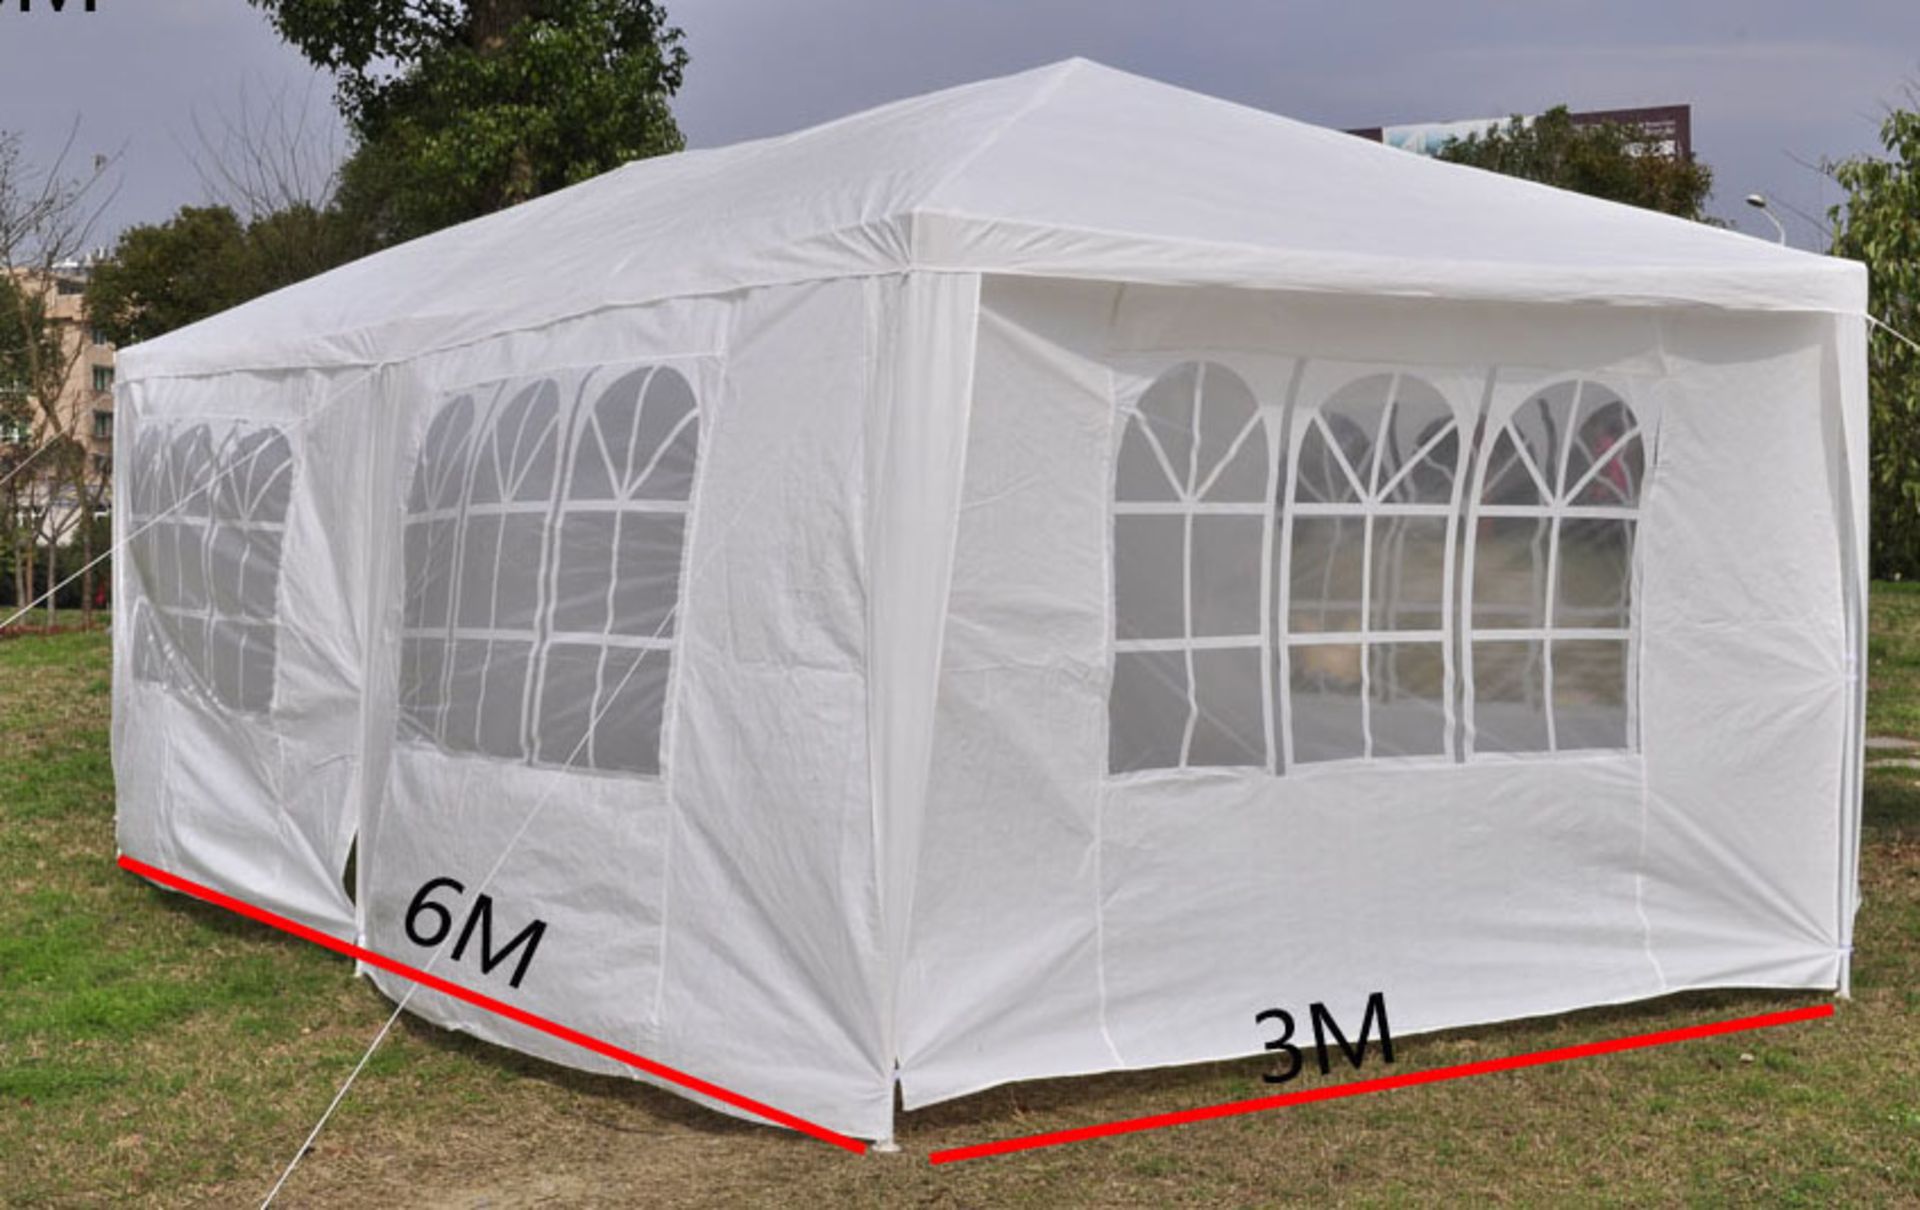 NEW IN BOX GAZEBO 3 X 6 M (PICTURE SHOWN IS A STOCK PICTURE OF ITEM)